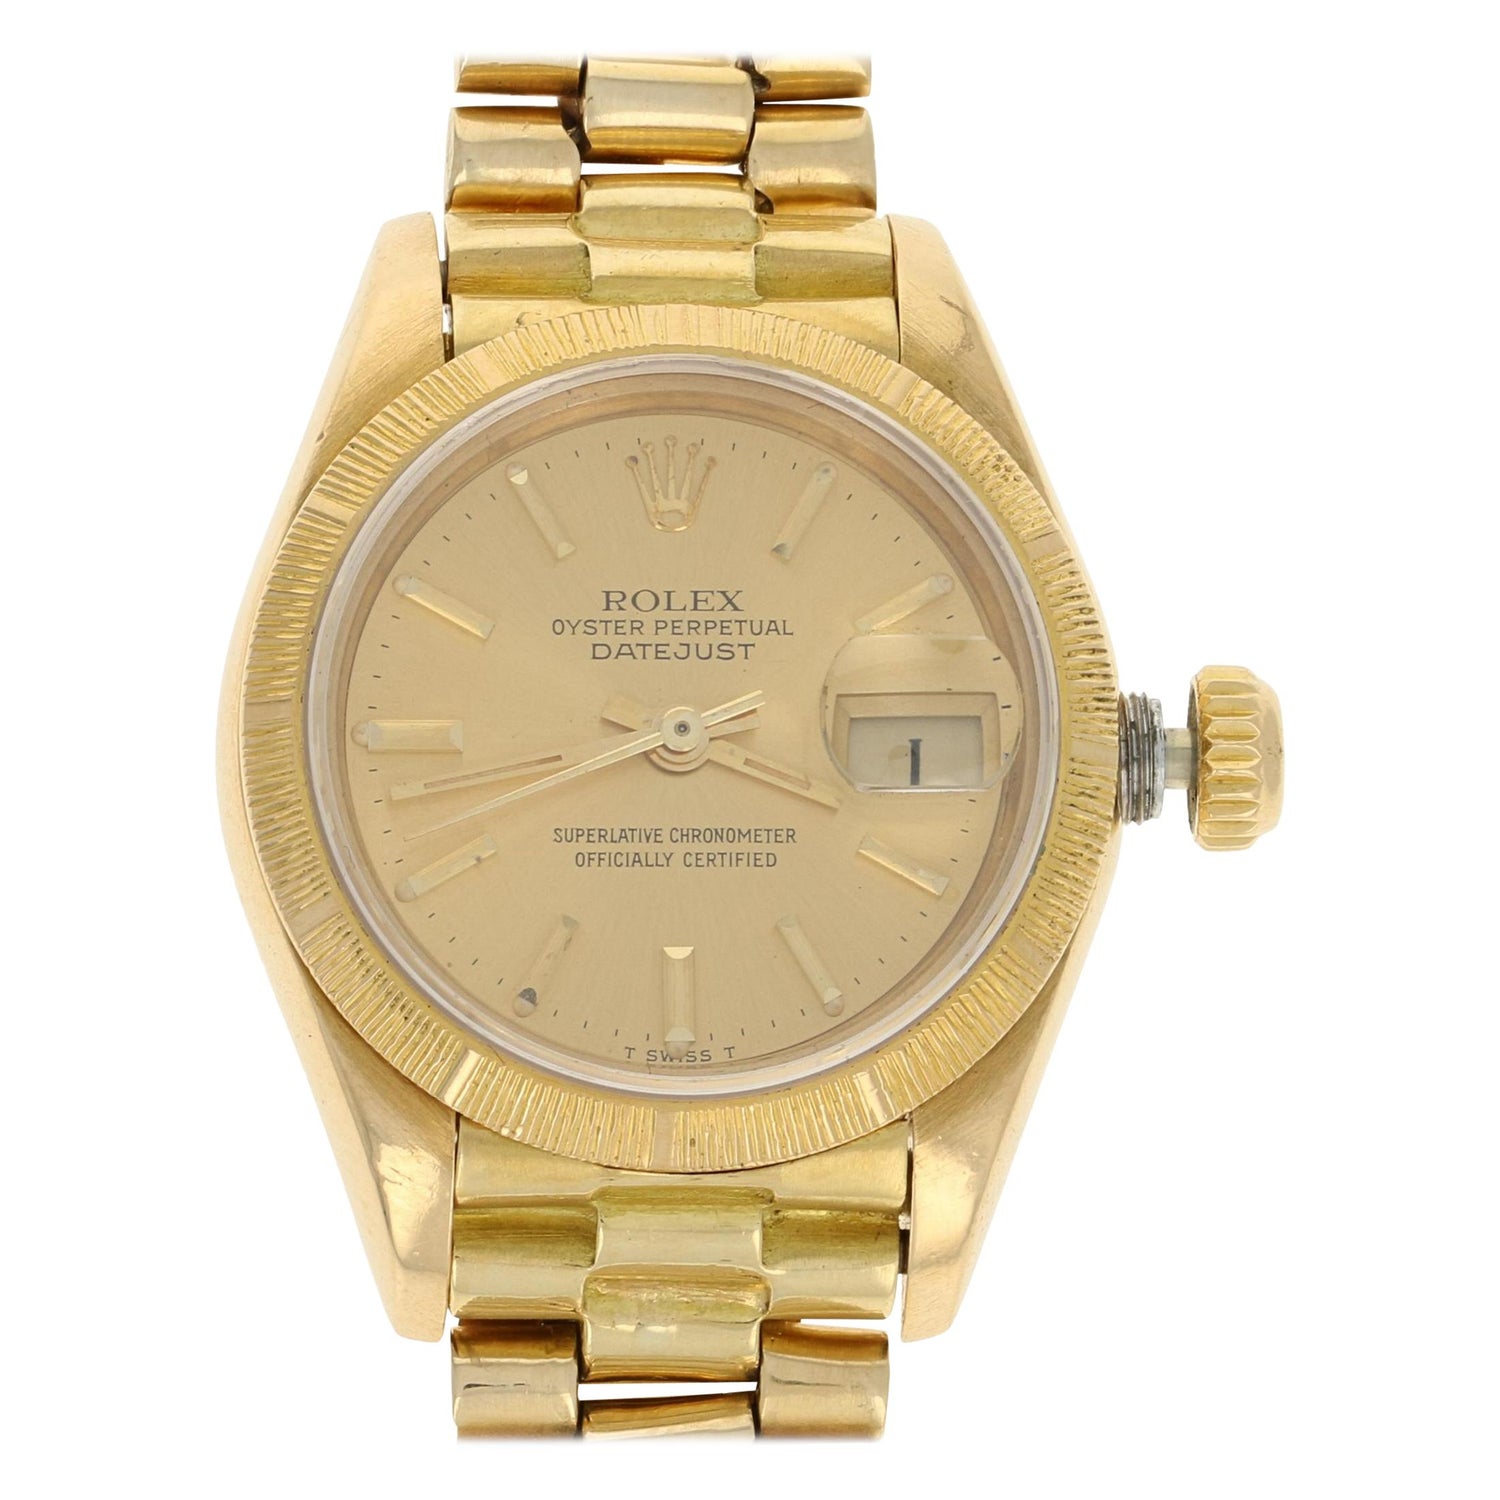 Rolex Geneve Swiss Made Rolex 18k 750 - For Sale on 1stDibs | 78488 rolex  geneve swiss made 18k 750 price, rolex geneve swiss made 18k 750 price 78488,  rolex geneve swiss made 18k 750 fiyat